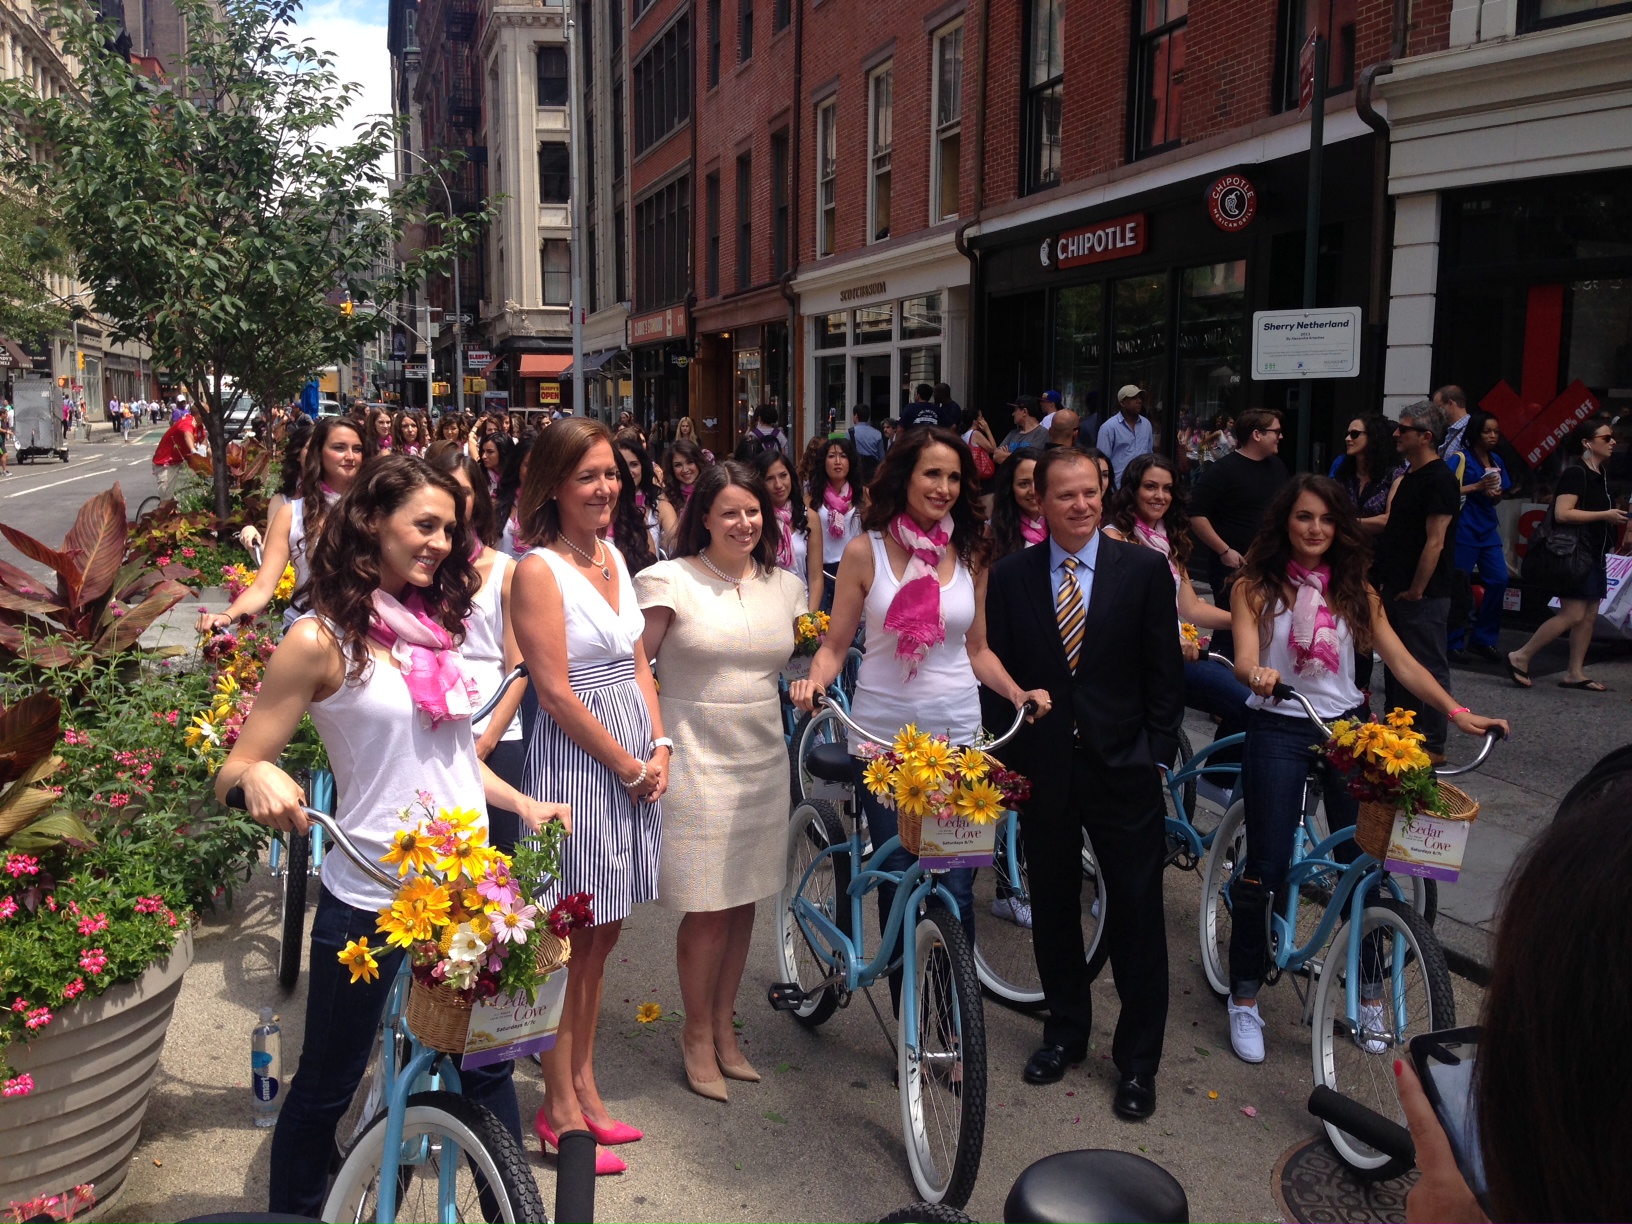 Our "Andie's Army" Bikes Manhattan for The Hallmark Channel!